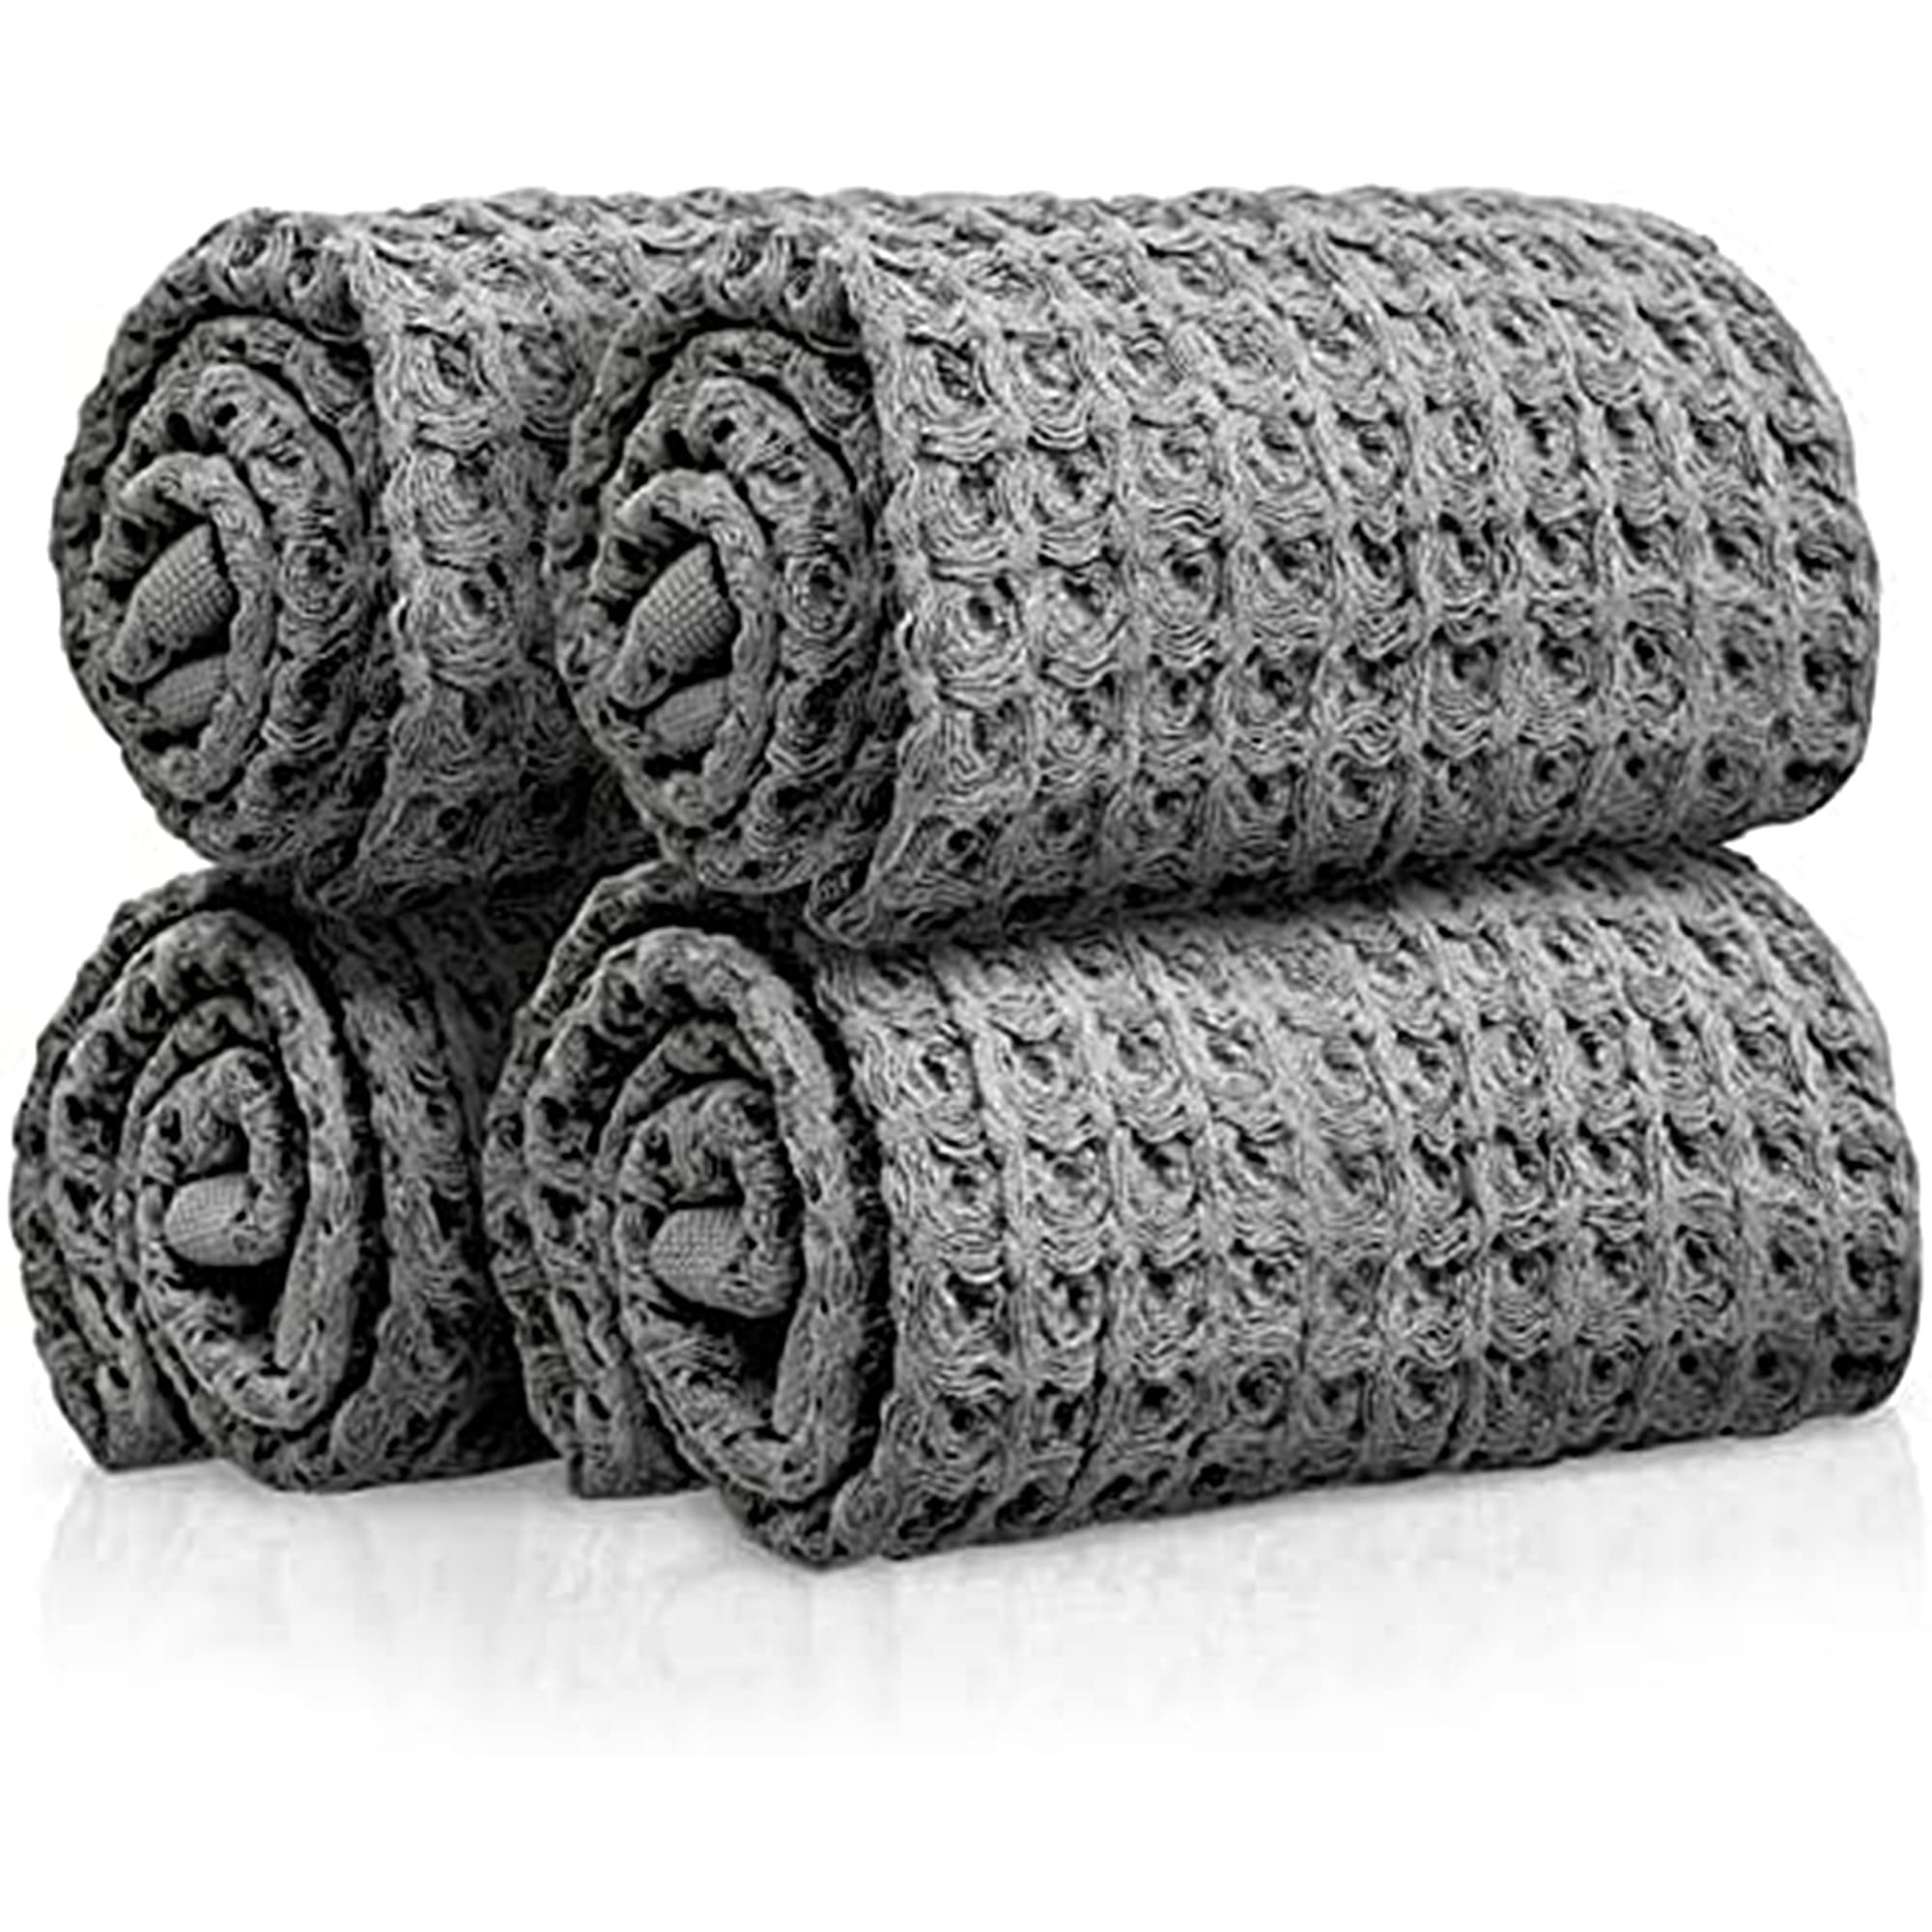  Waffle Hand Towel for Bathroom, Luxury Bath Towels Infused with Ions,  Ultra Soft Absorbent Quick Drying Design Shower Towels, Lightweight